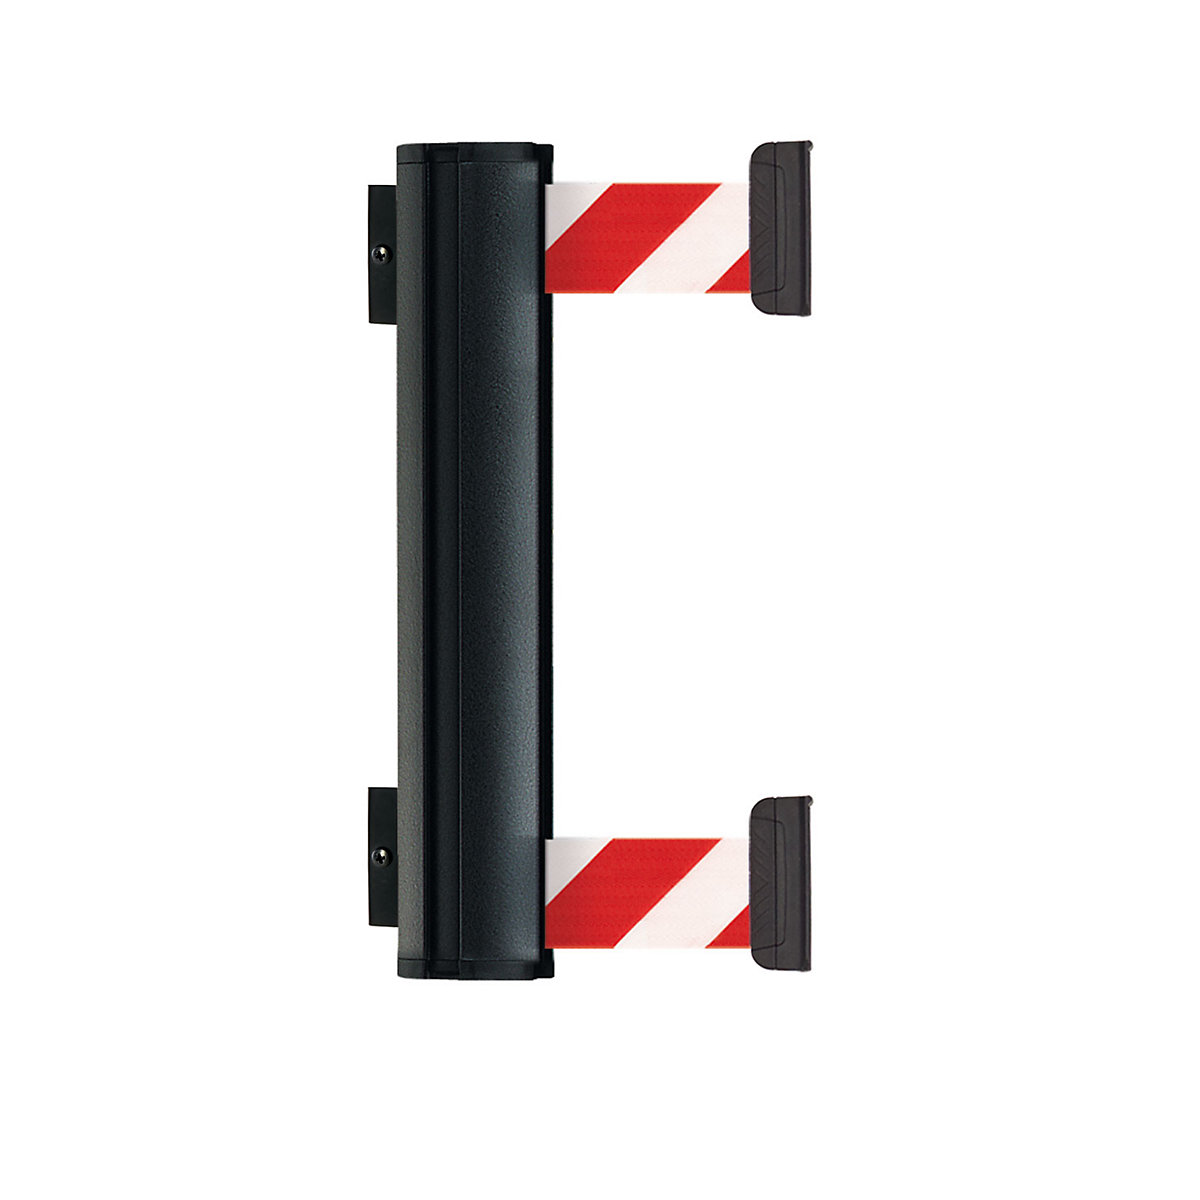 DOUBLE tape belt cartridge made of aluminium, belt extends to max. 3700 mm, red / white belt